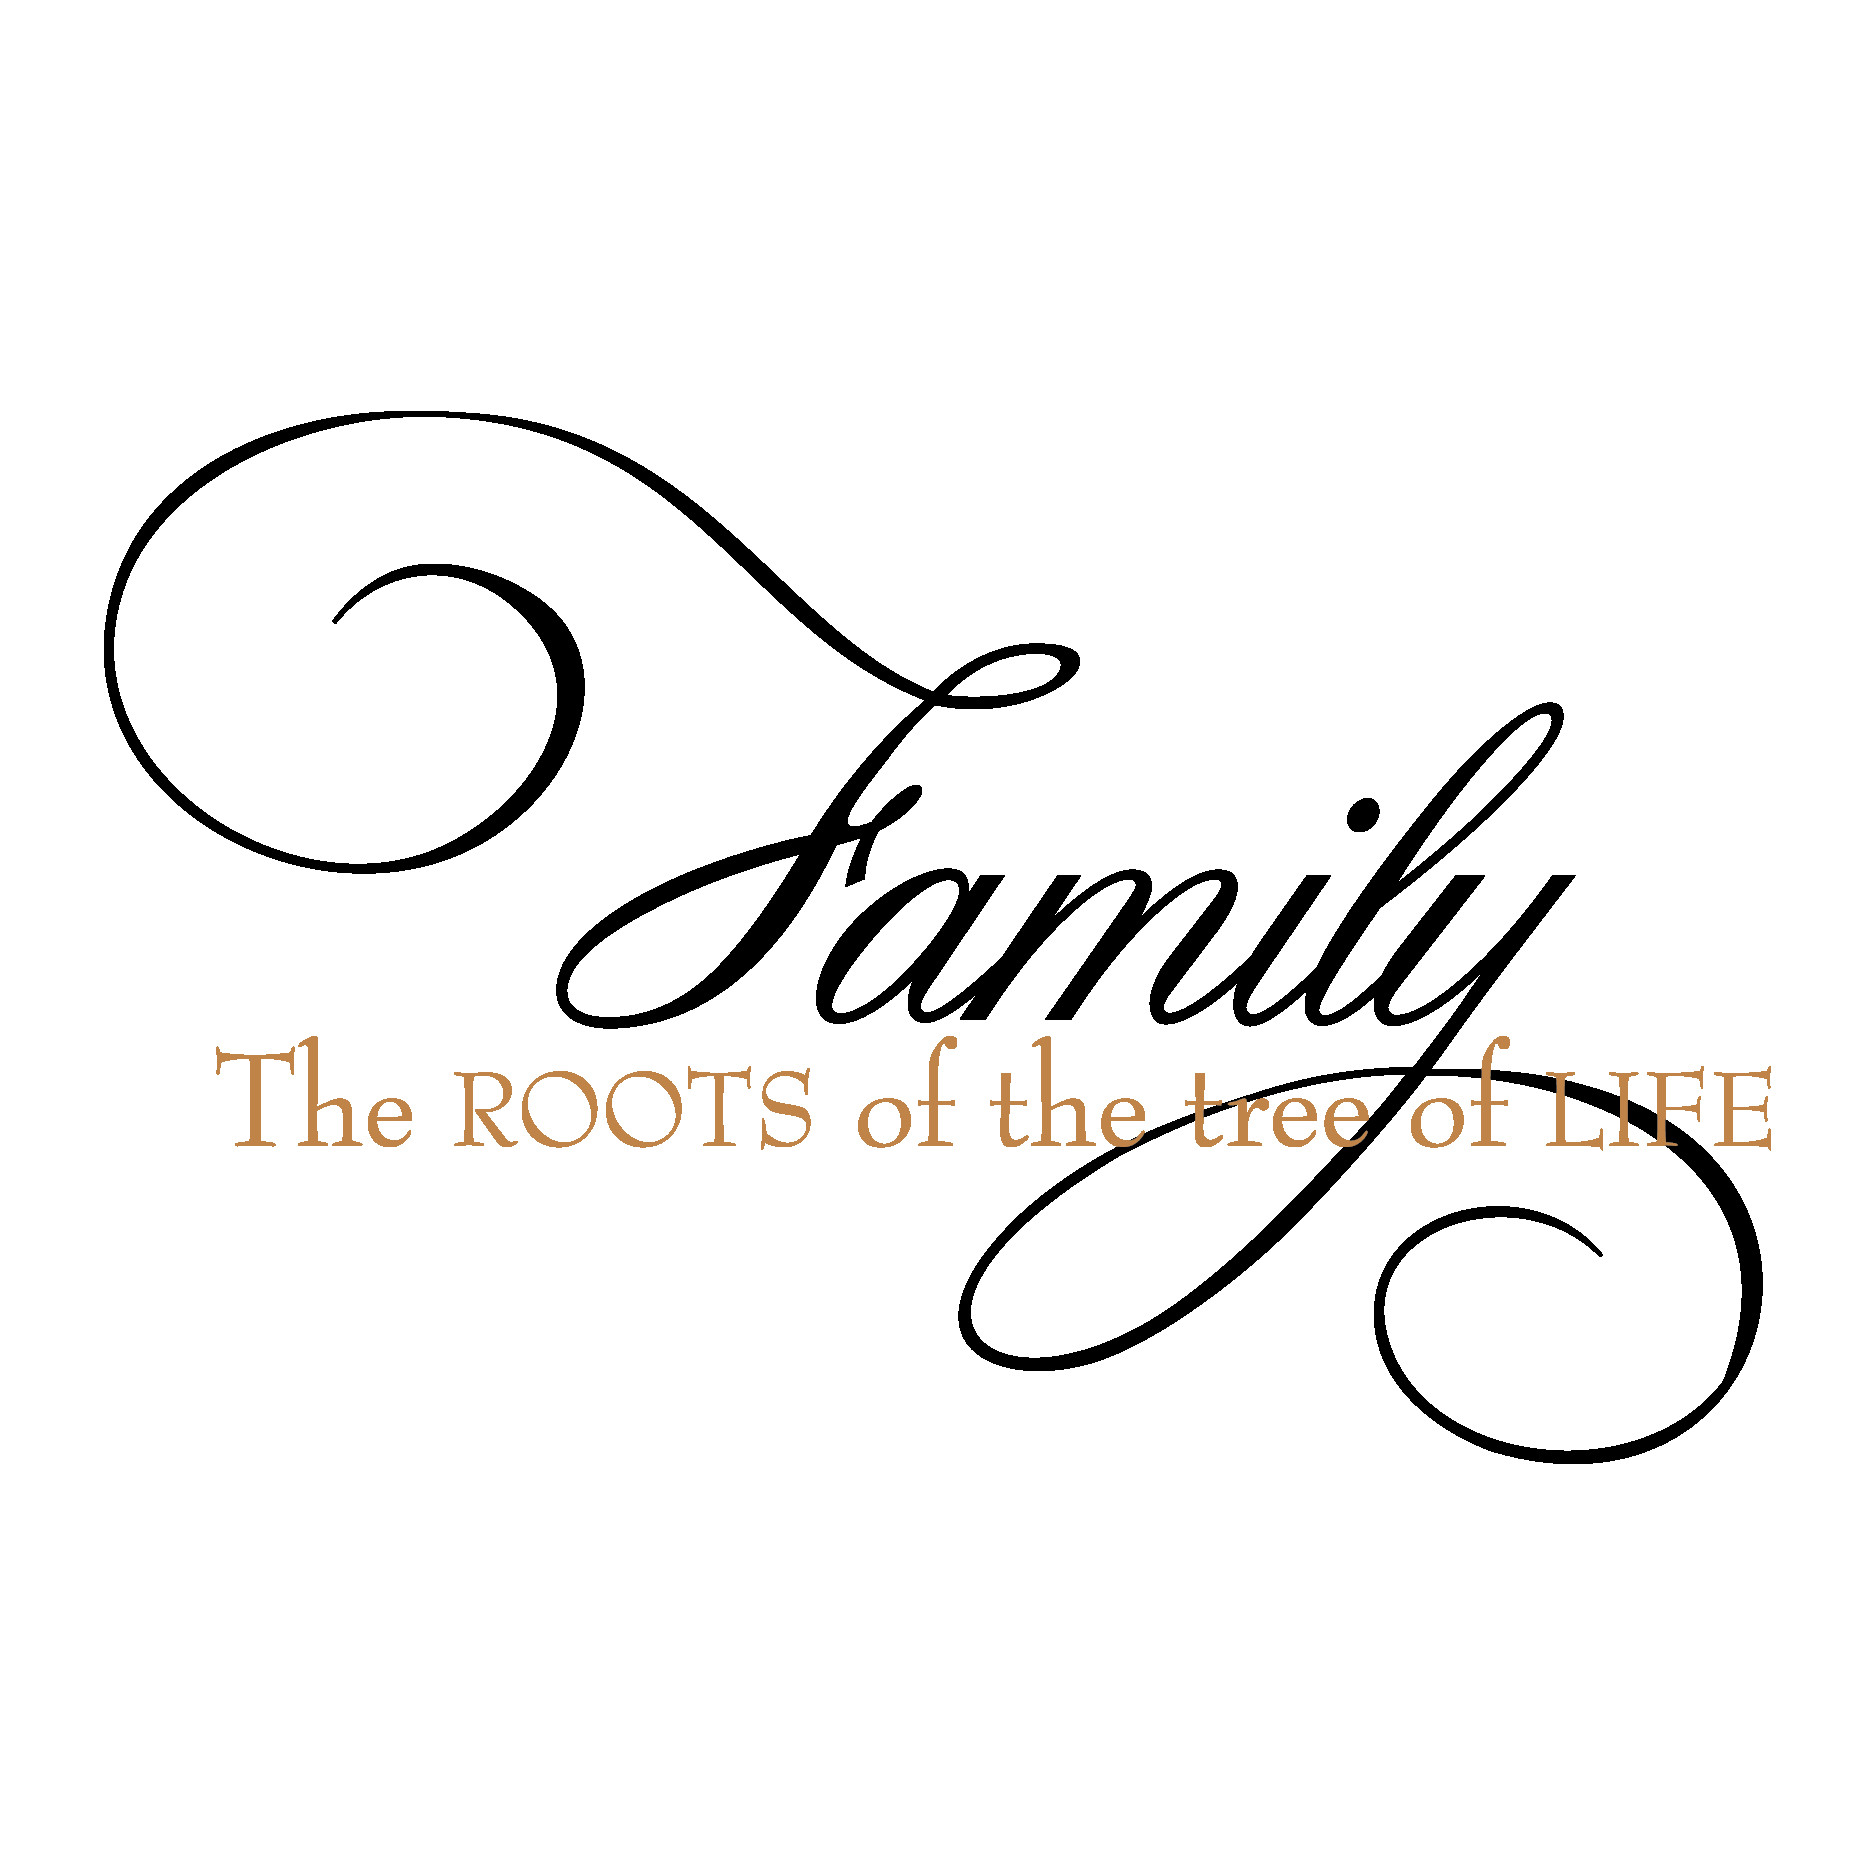 Family Roots Quotes
 Roots of the Tree of Life Wall Quotes™ Decal